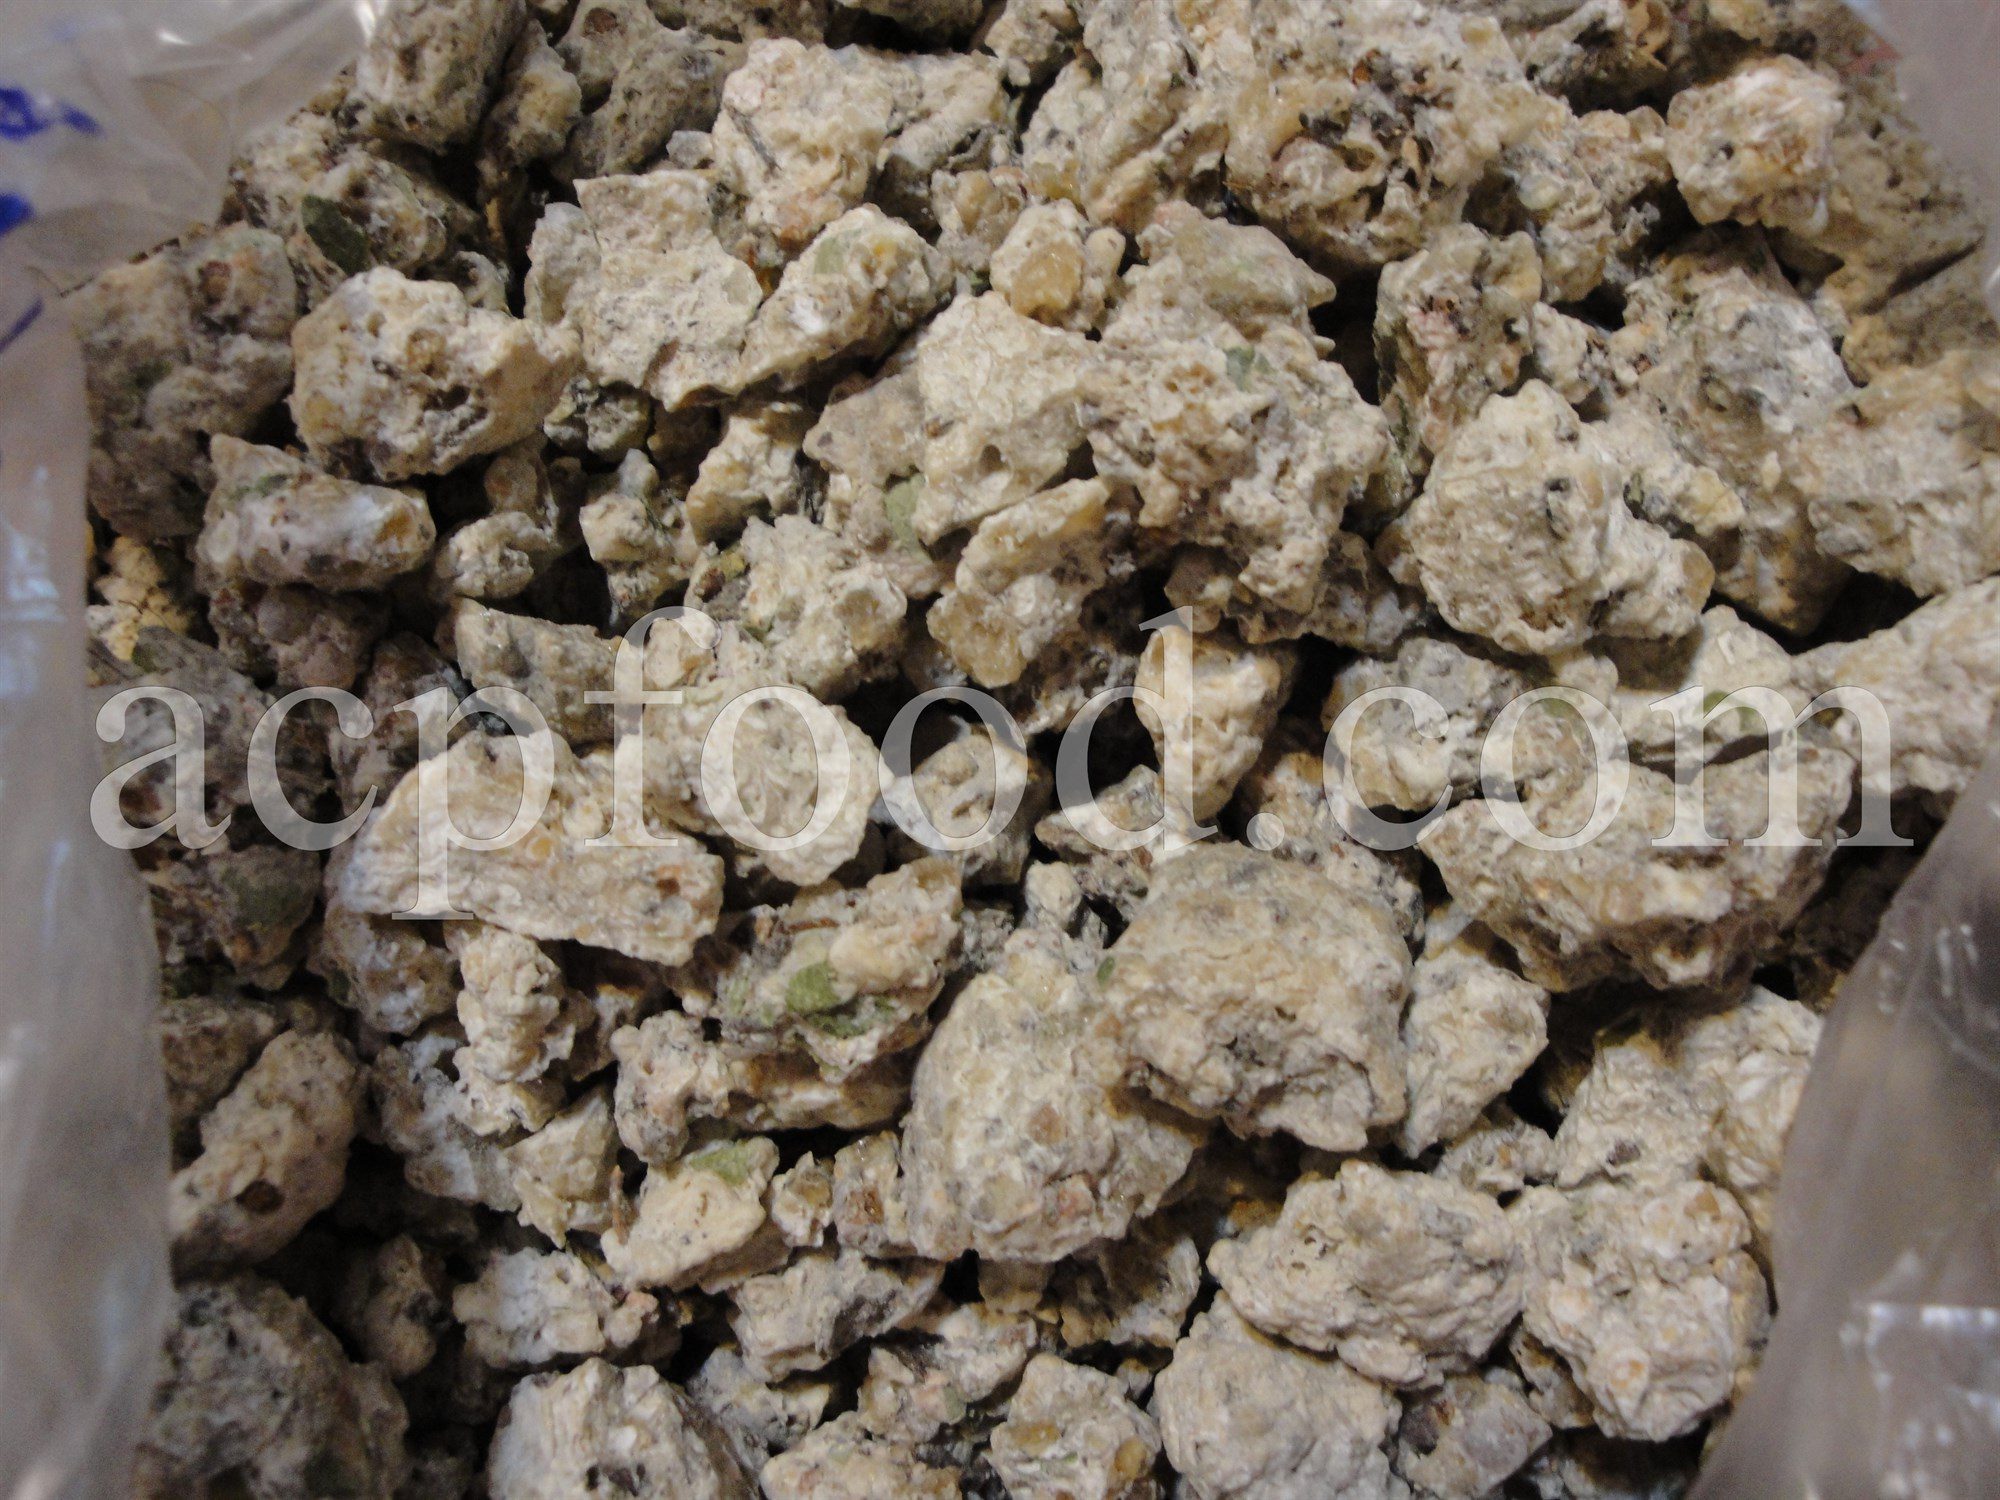 Bulk Purgative Manna for sale. Purgative Manna Wholesaler, Supplier, Exporter and Provider. Buy High Quality Purgative Manna with the Best Price.